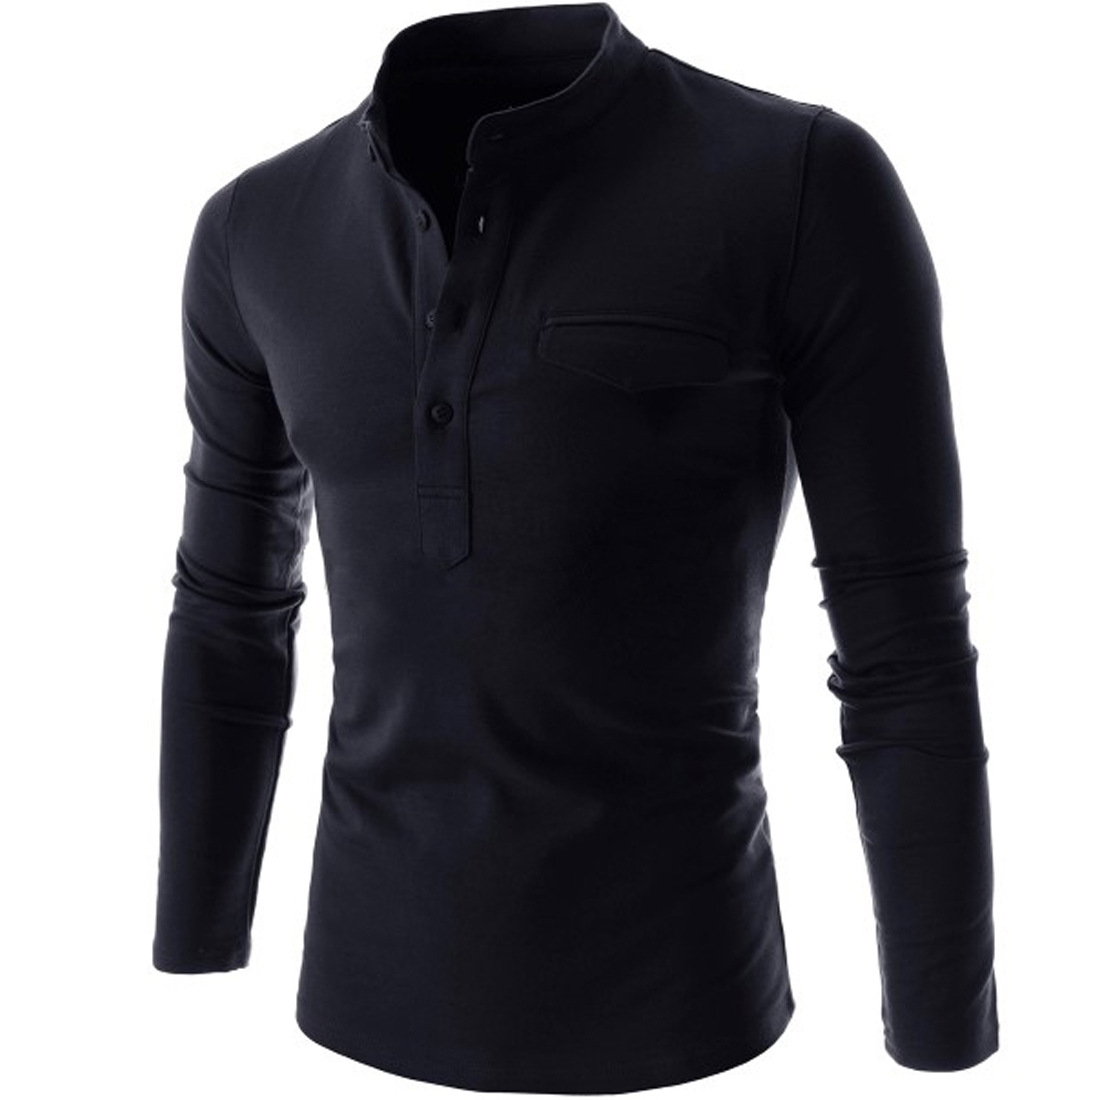 Men's solid color long sleeve stand collar base shirt